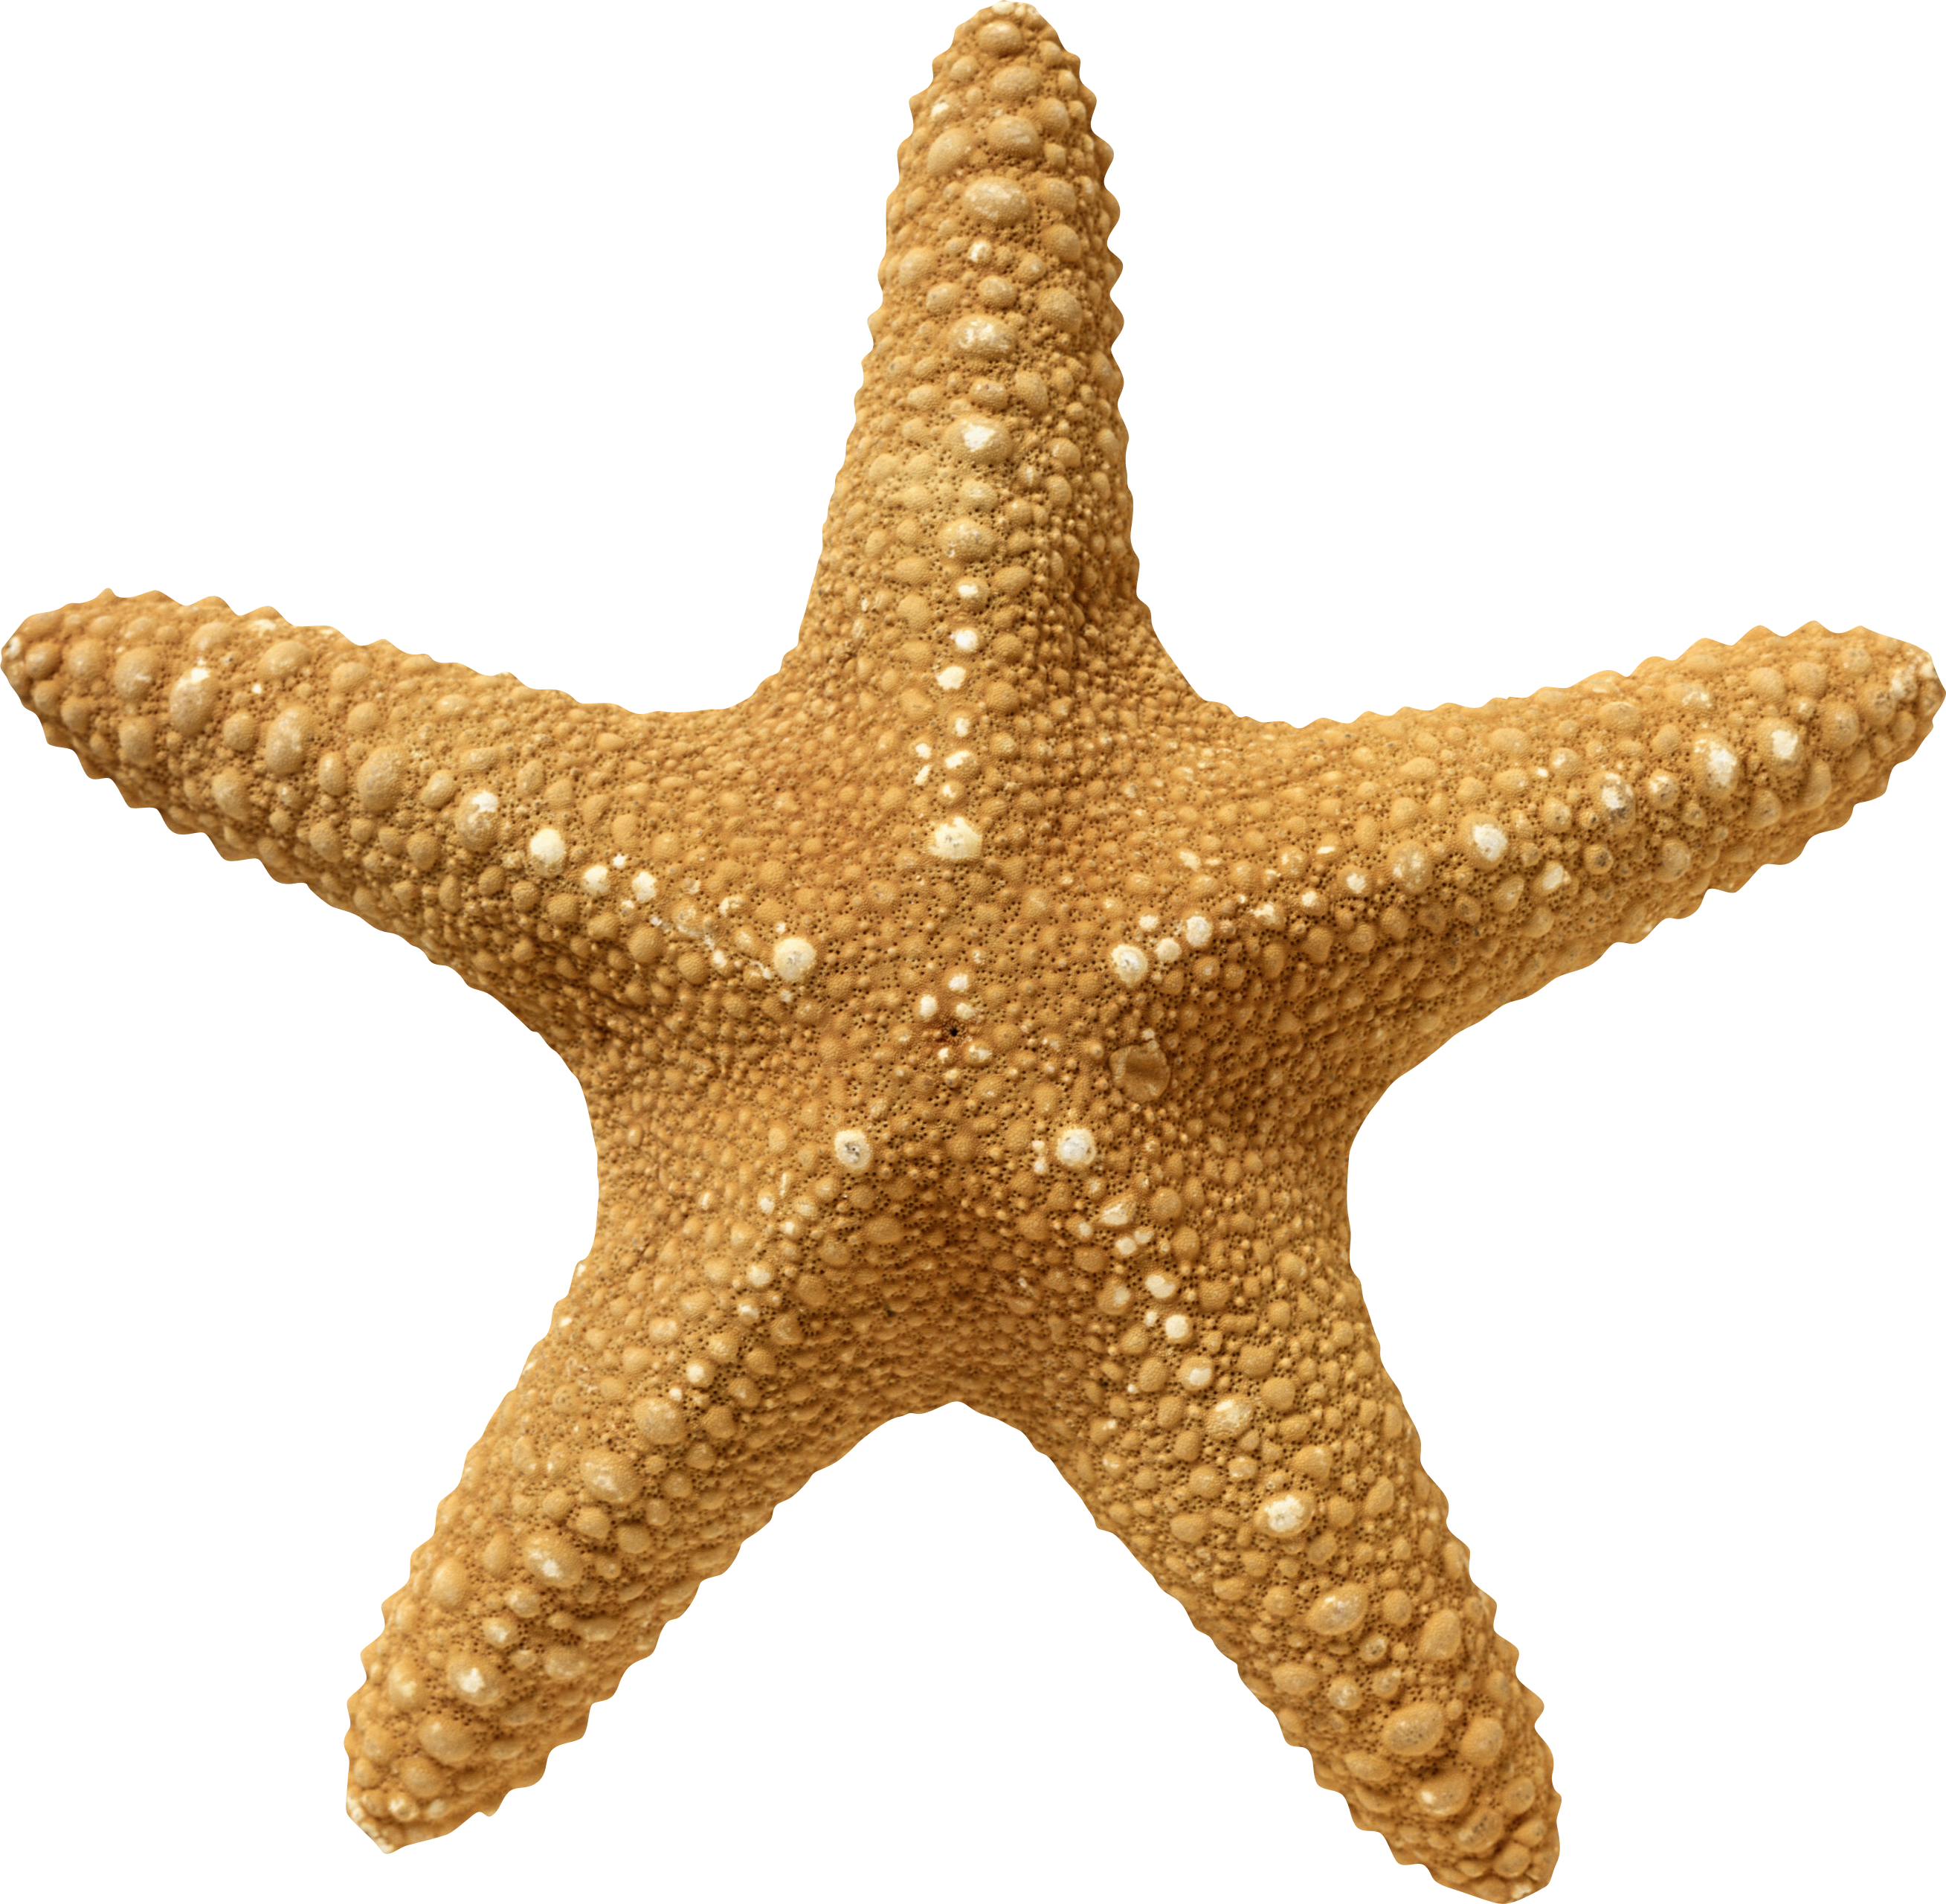 starfish png images collected for download crazypngm crazy png images download #28614